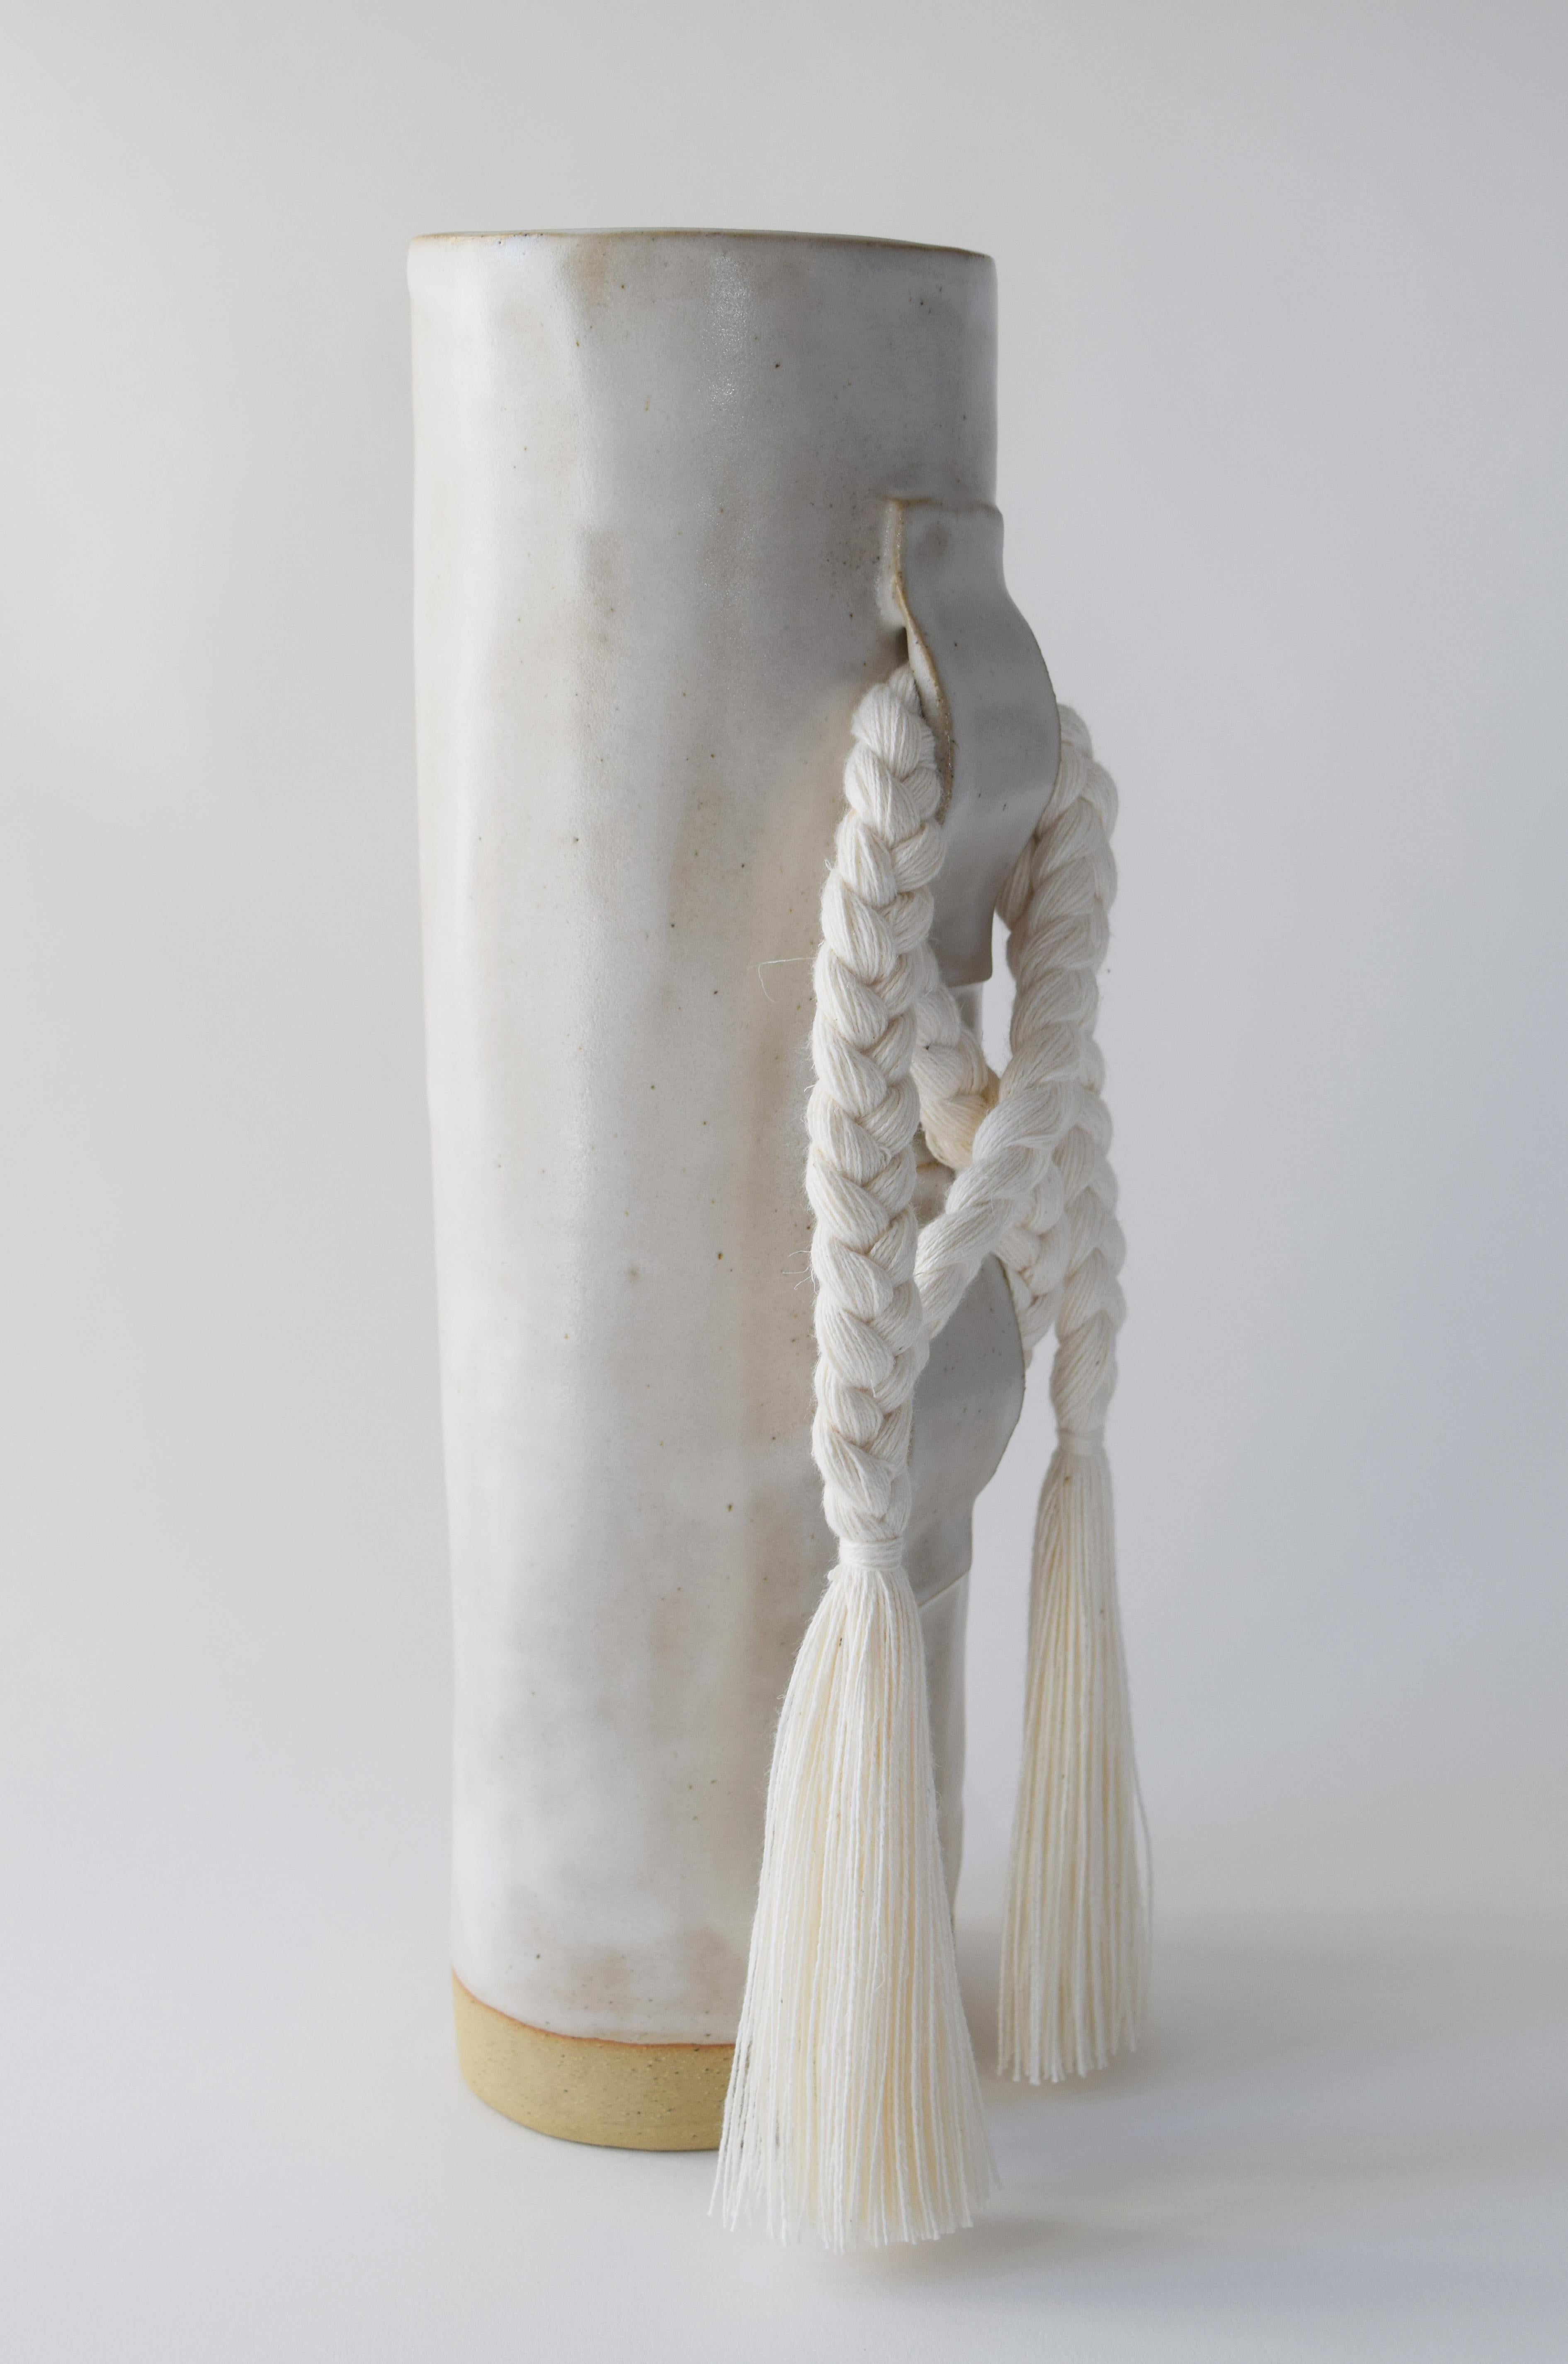 Vase #696 by Karen Gayle Tinney

Featuring a large gestural knot, this vase takes inspiration from the braided details of Karen’s one of a kind wall sculptures.

Hand formed stoneware with satin white glaze. White cotton braided details (braid is